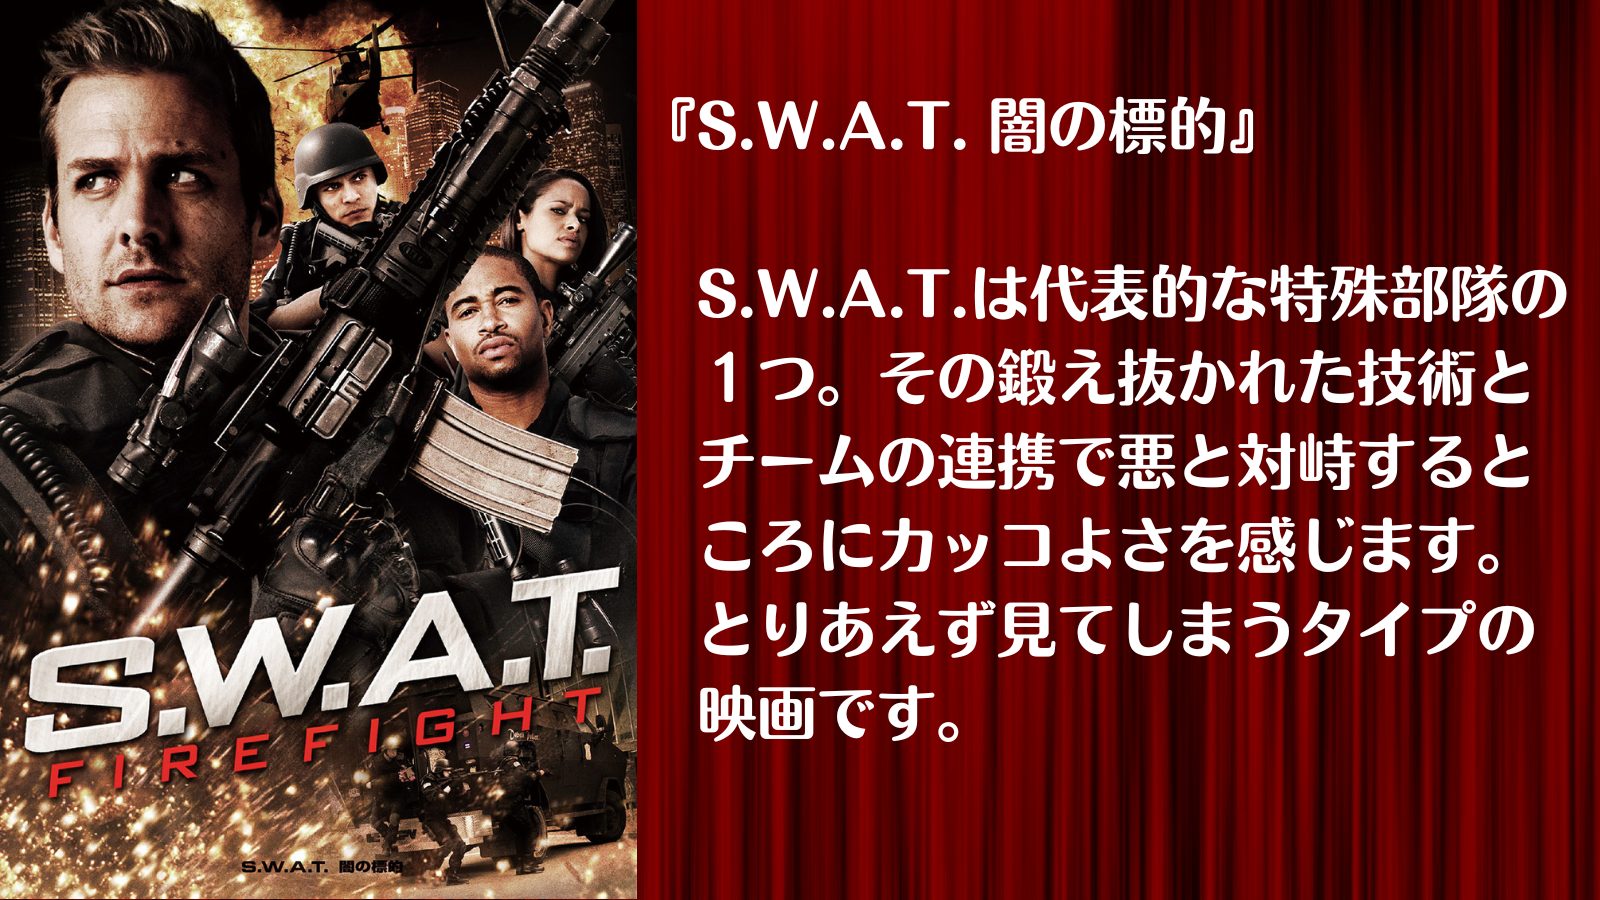 Special Weapons And Tactics『S.W.A.T. 闇の標的』｜１人で気軽に映画を楽しむ会